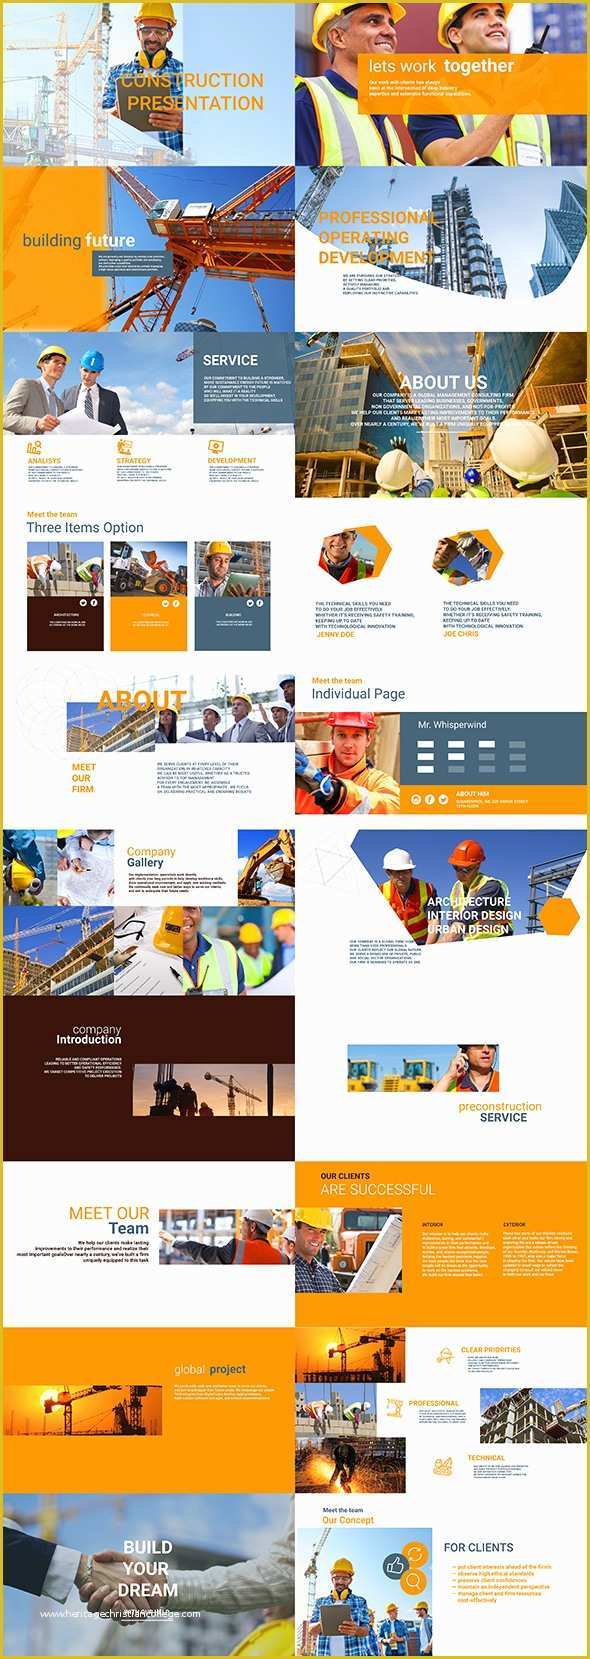 Promo Video Templates Free Download Of Construction Presentation – Building Promo Industrial